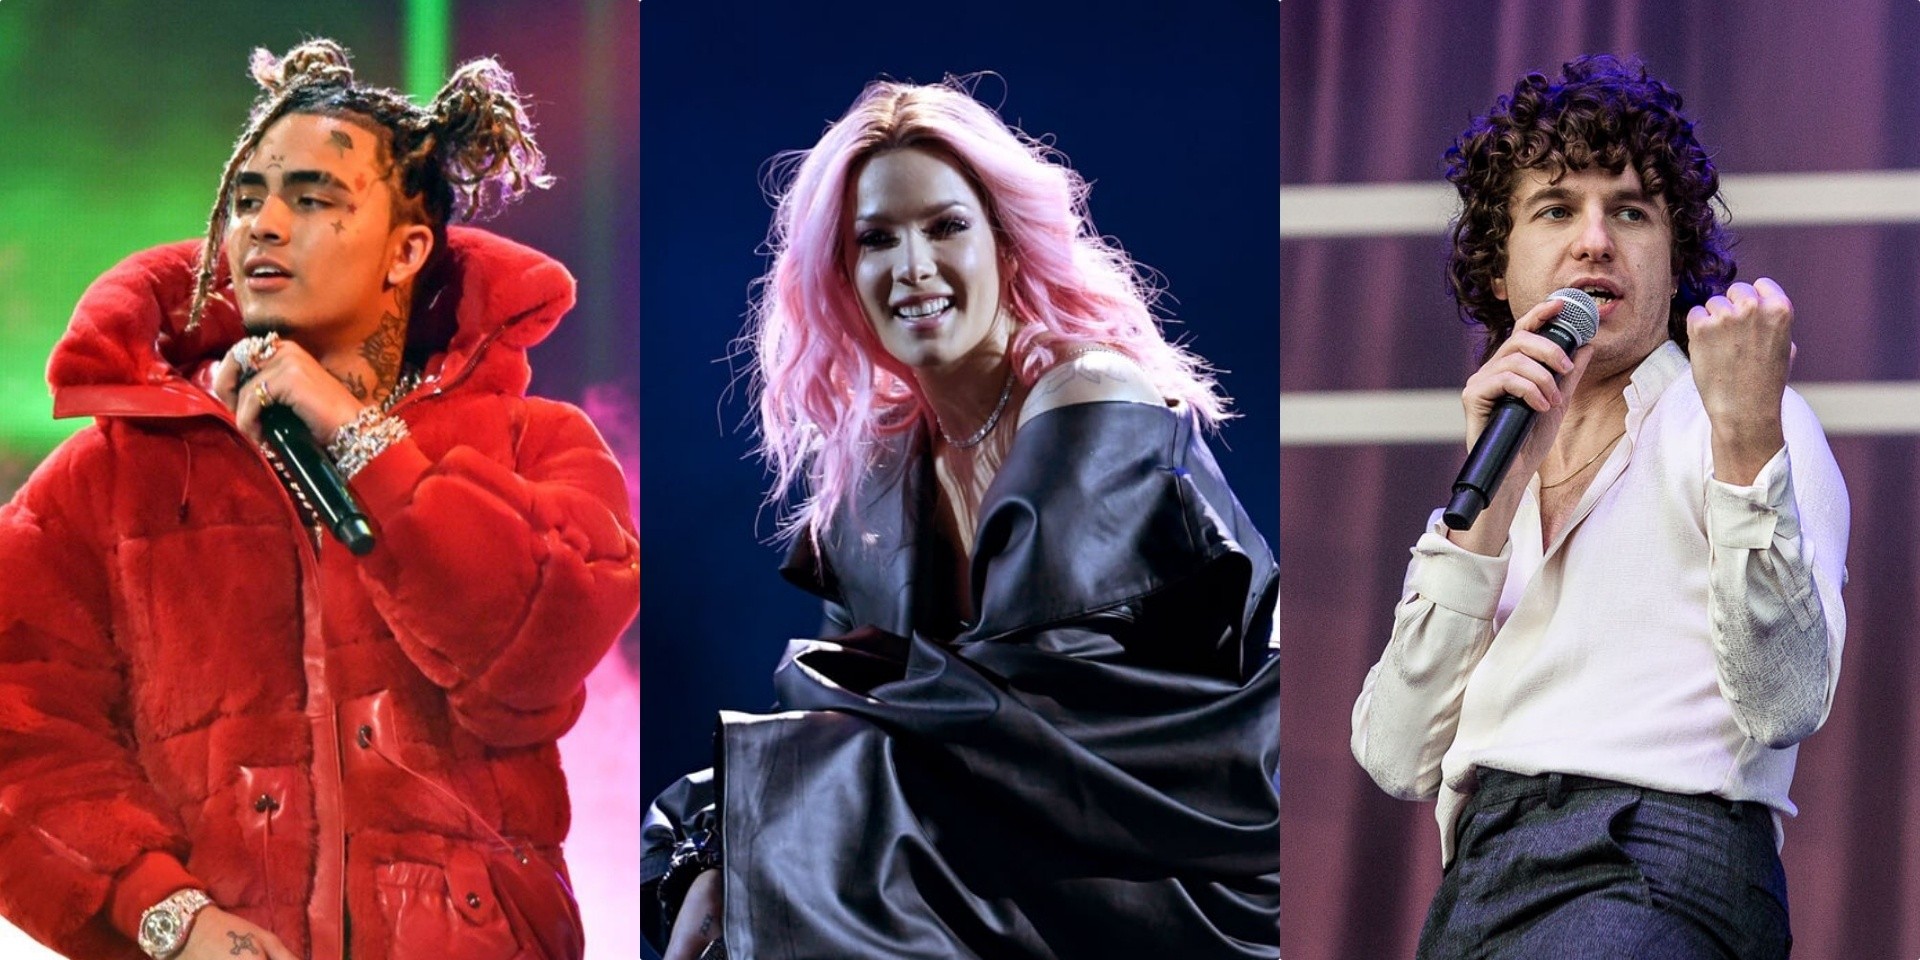 Halsey, Lil Pump, The Kooks and more to perform at Clockenflap 2019 in Hong Kong